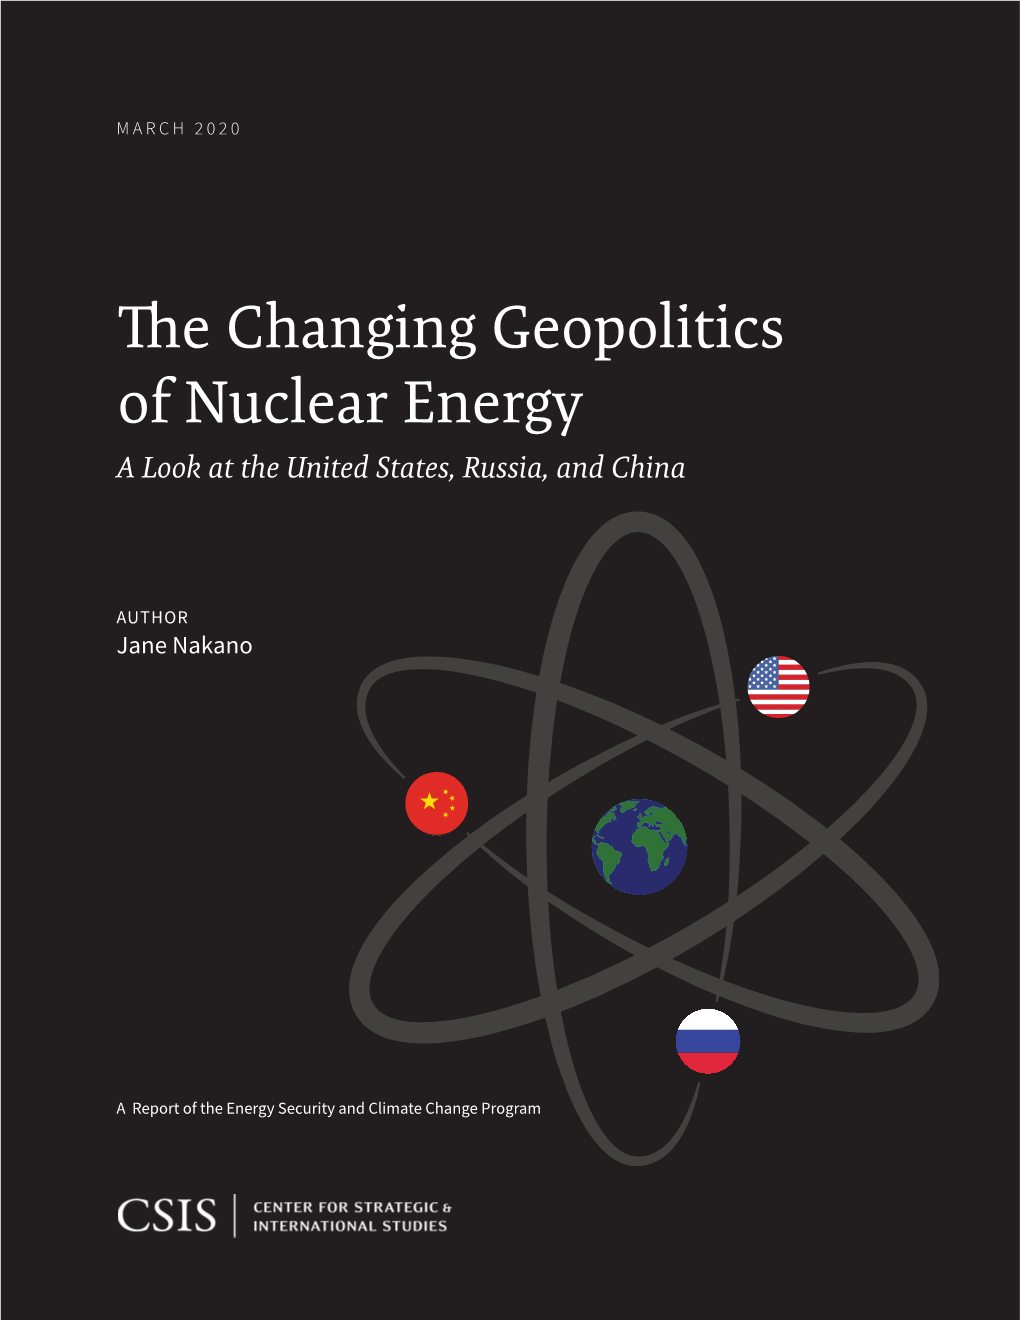 The Changing Geopolitics of Nuclear Energy a Look at the United States, Russia, and China